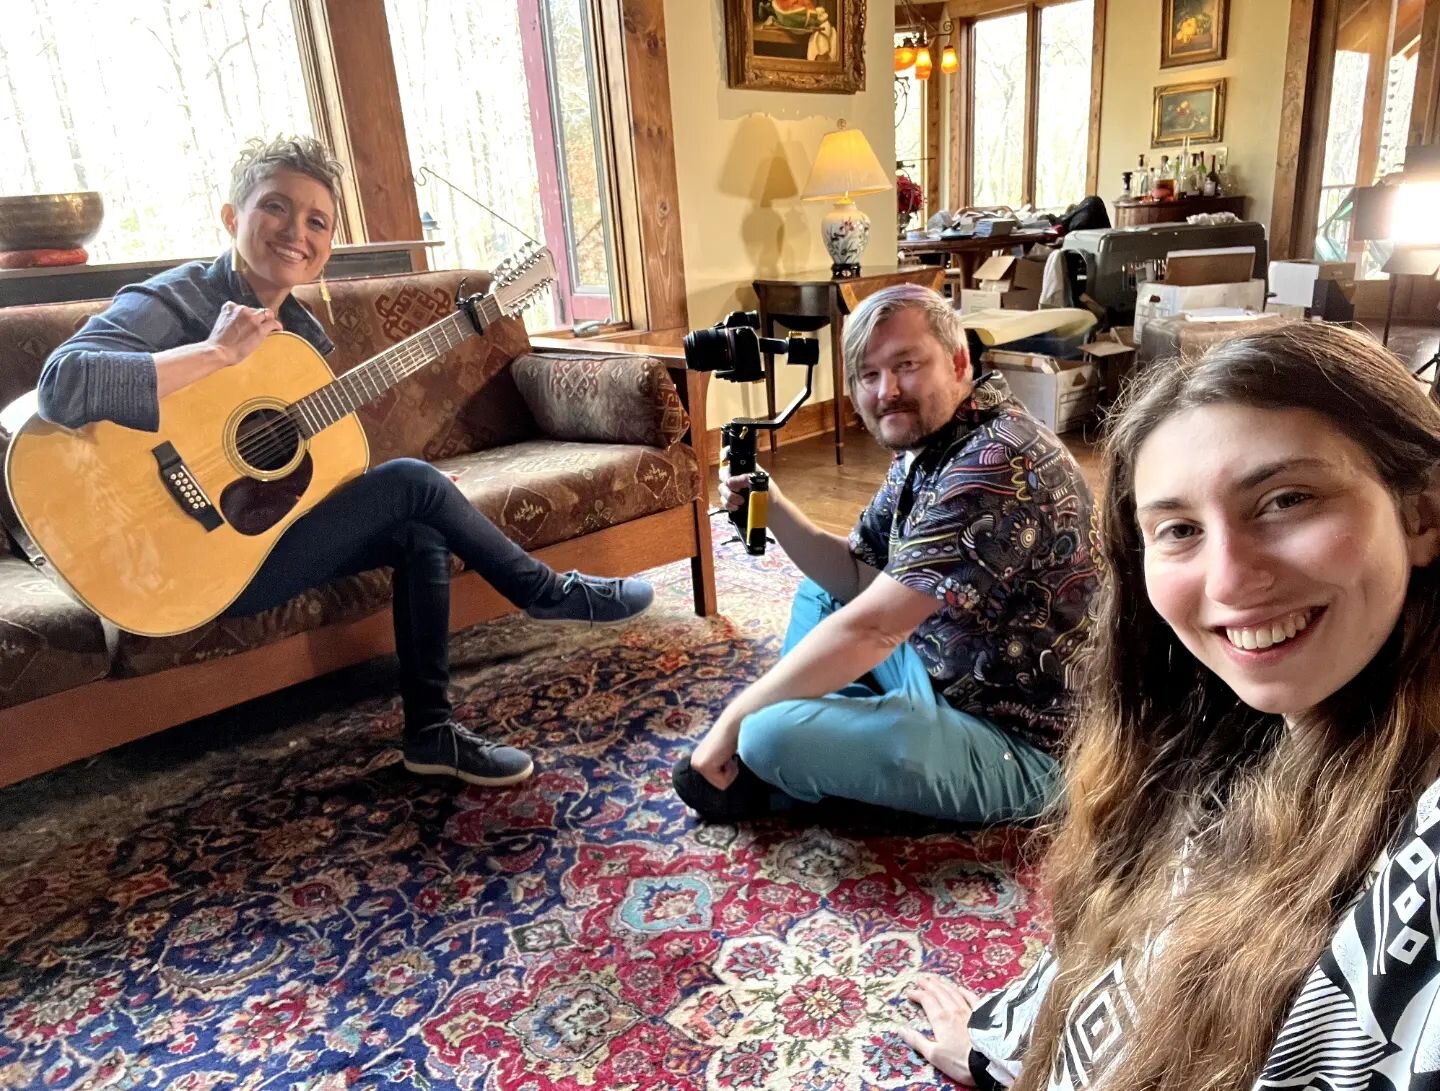 On set today shooting another beautiful video with @allaroundartsy for the best guitar player I know @christielenee .📸
Christie has an album release this Sunday 11/20 at @isisasheville 🎉